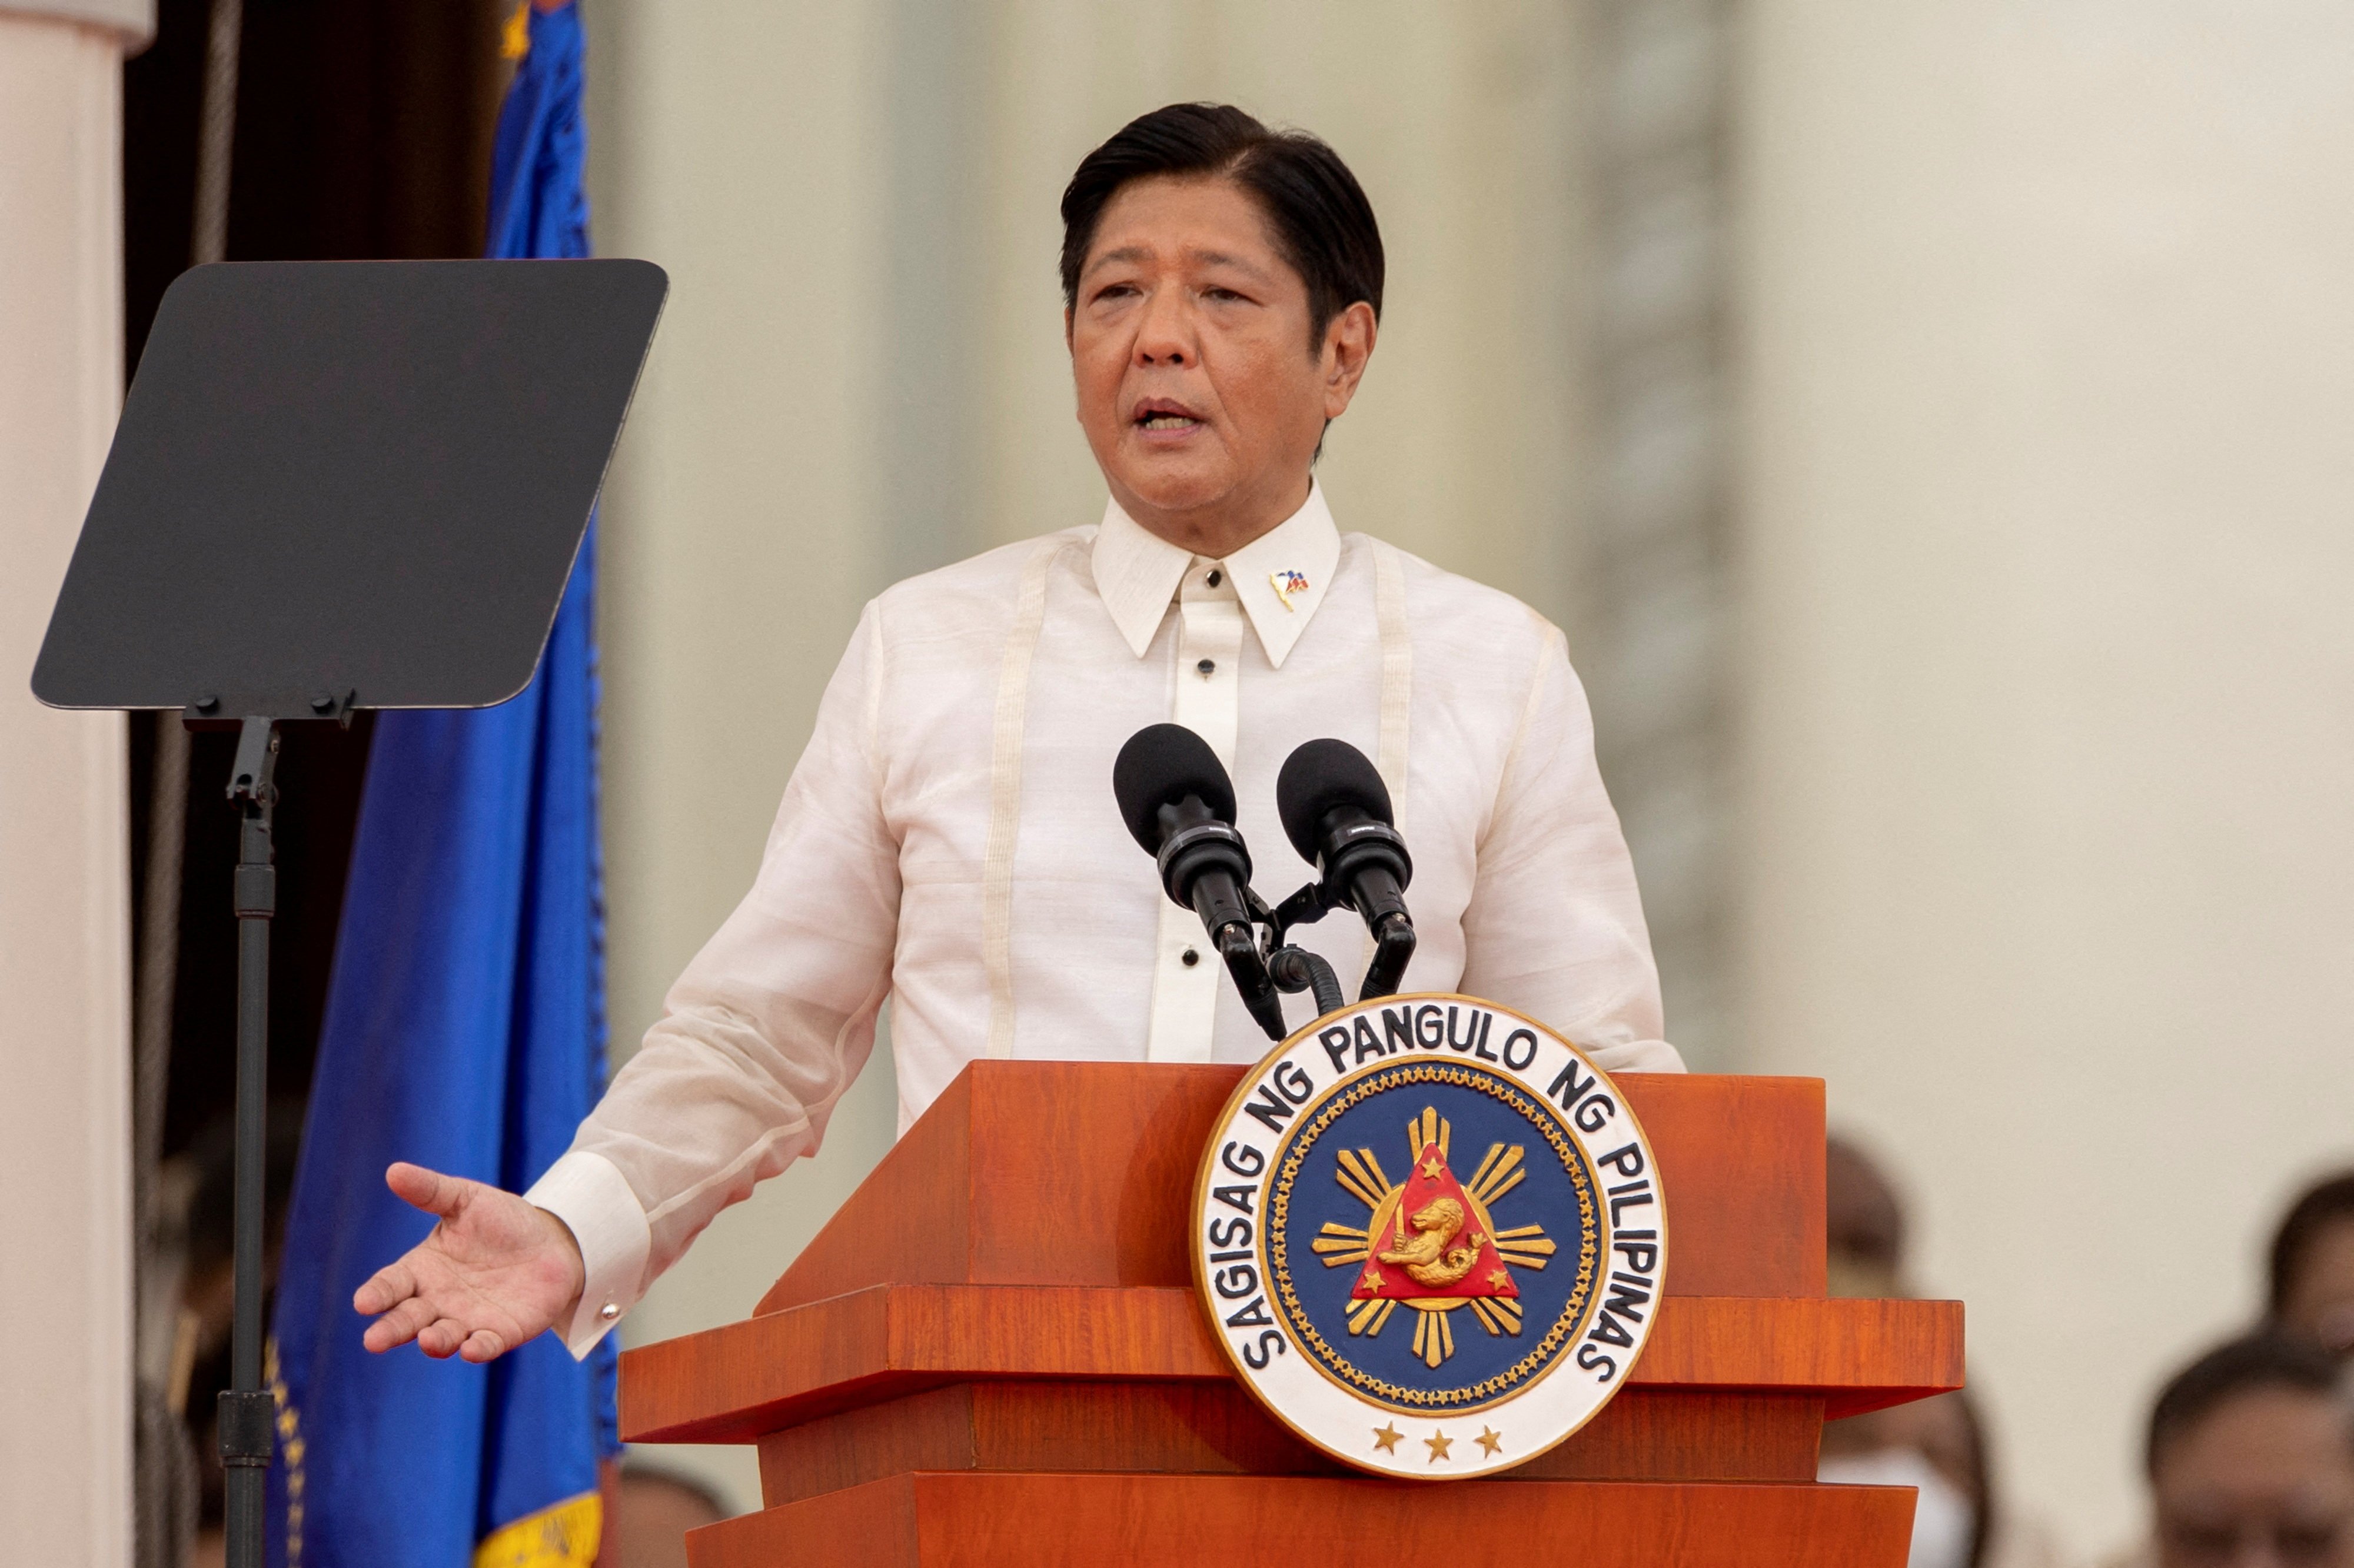 Ferdinand Marcos Jnr, son of the late dictator Ferdinand Marcos, delivers a speech after taking the oath as the 17th president of the Philippines, on June 30. Photo: Reuters